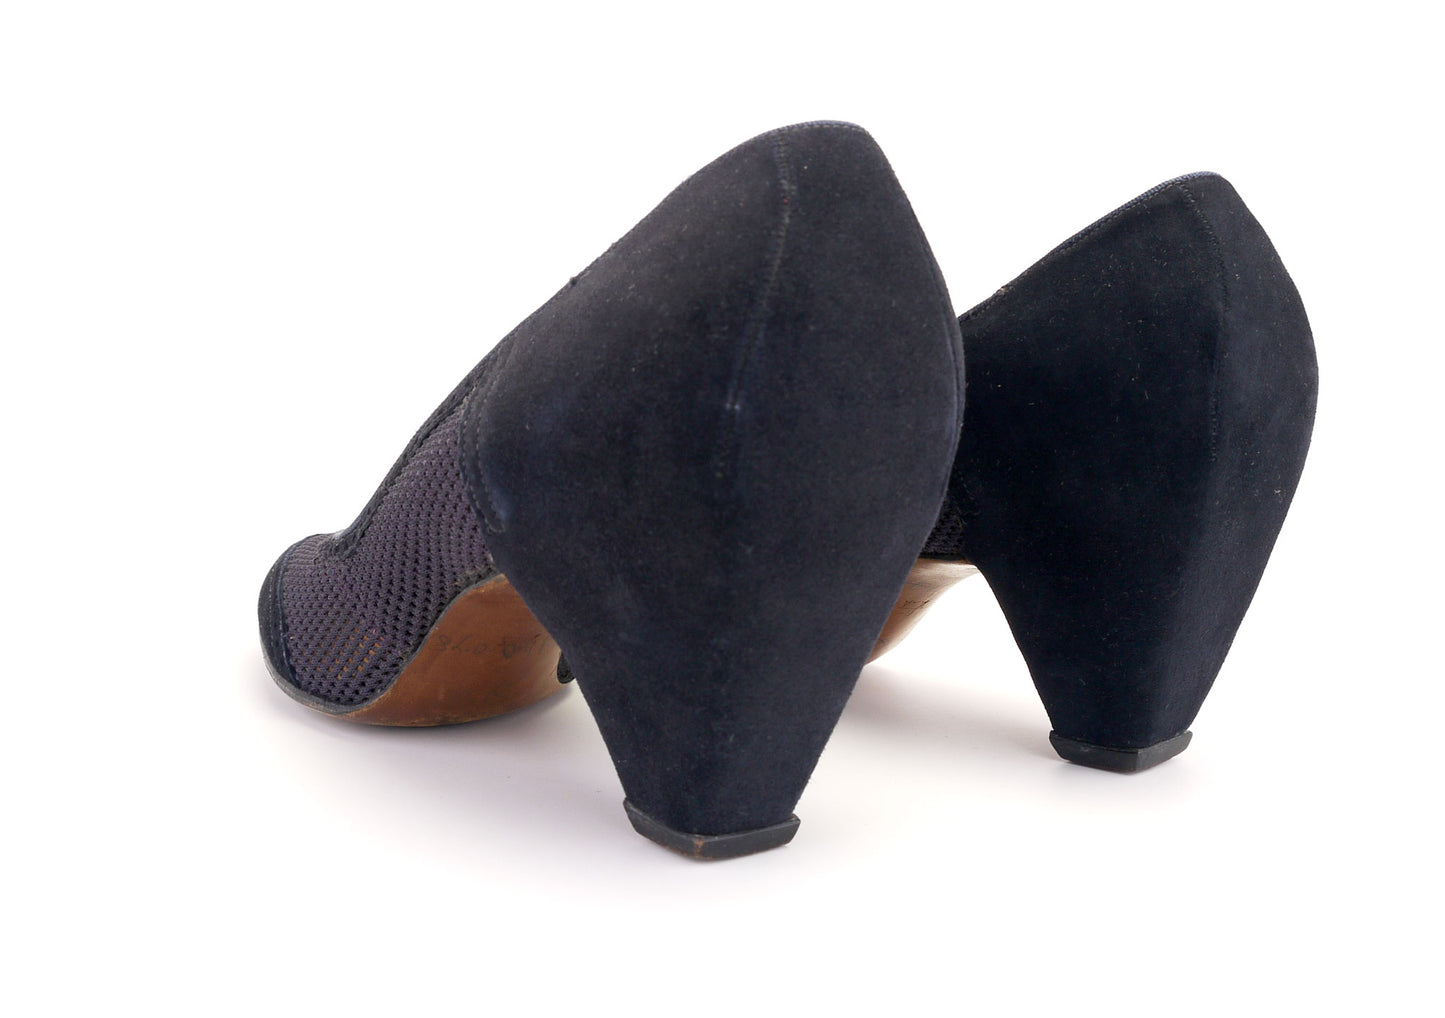 Quirky 1950s Square Heeled Pumps by Brevitt UK 3.5